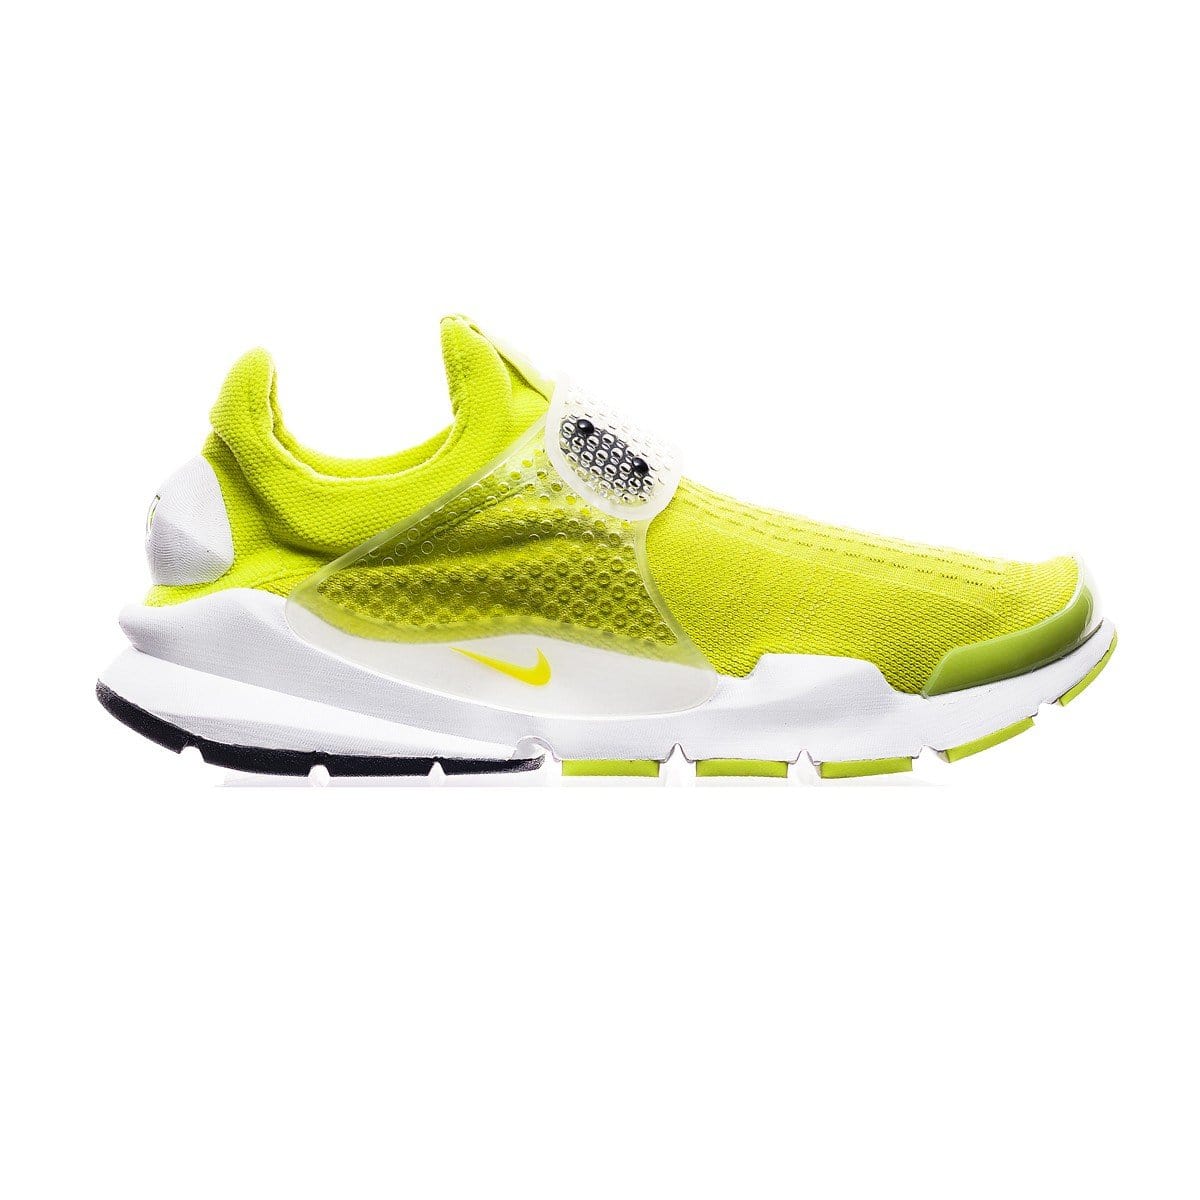 Nike Special Project Sock Dart SP Neon Yellow - Summit White